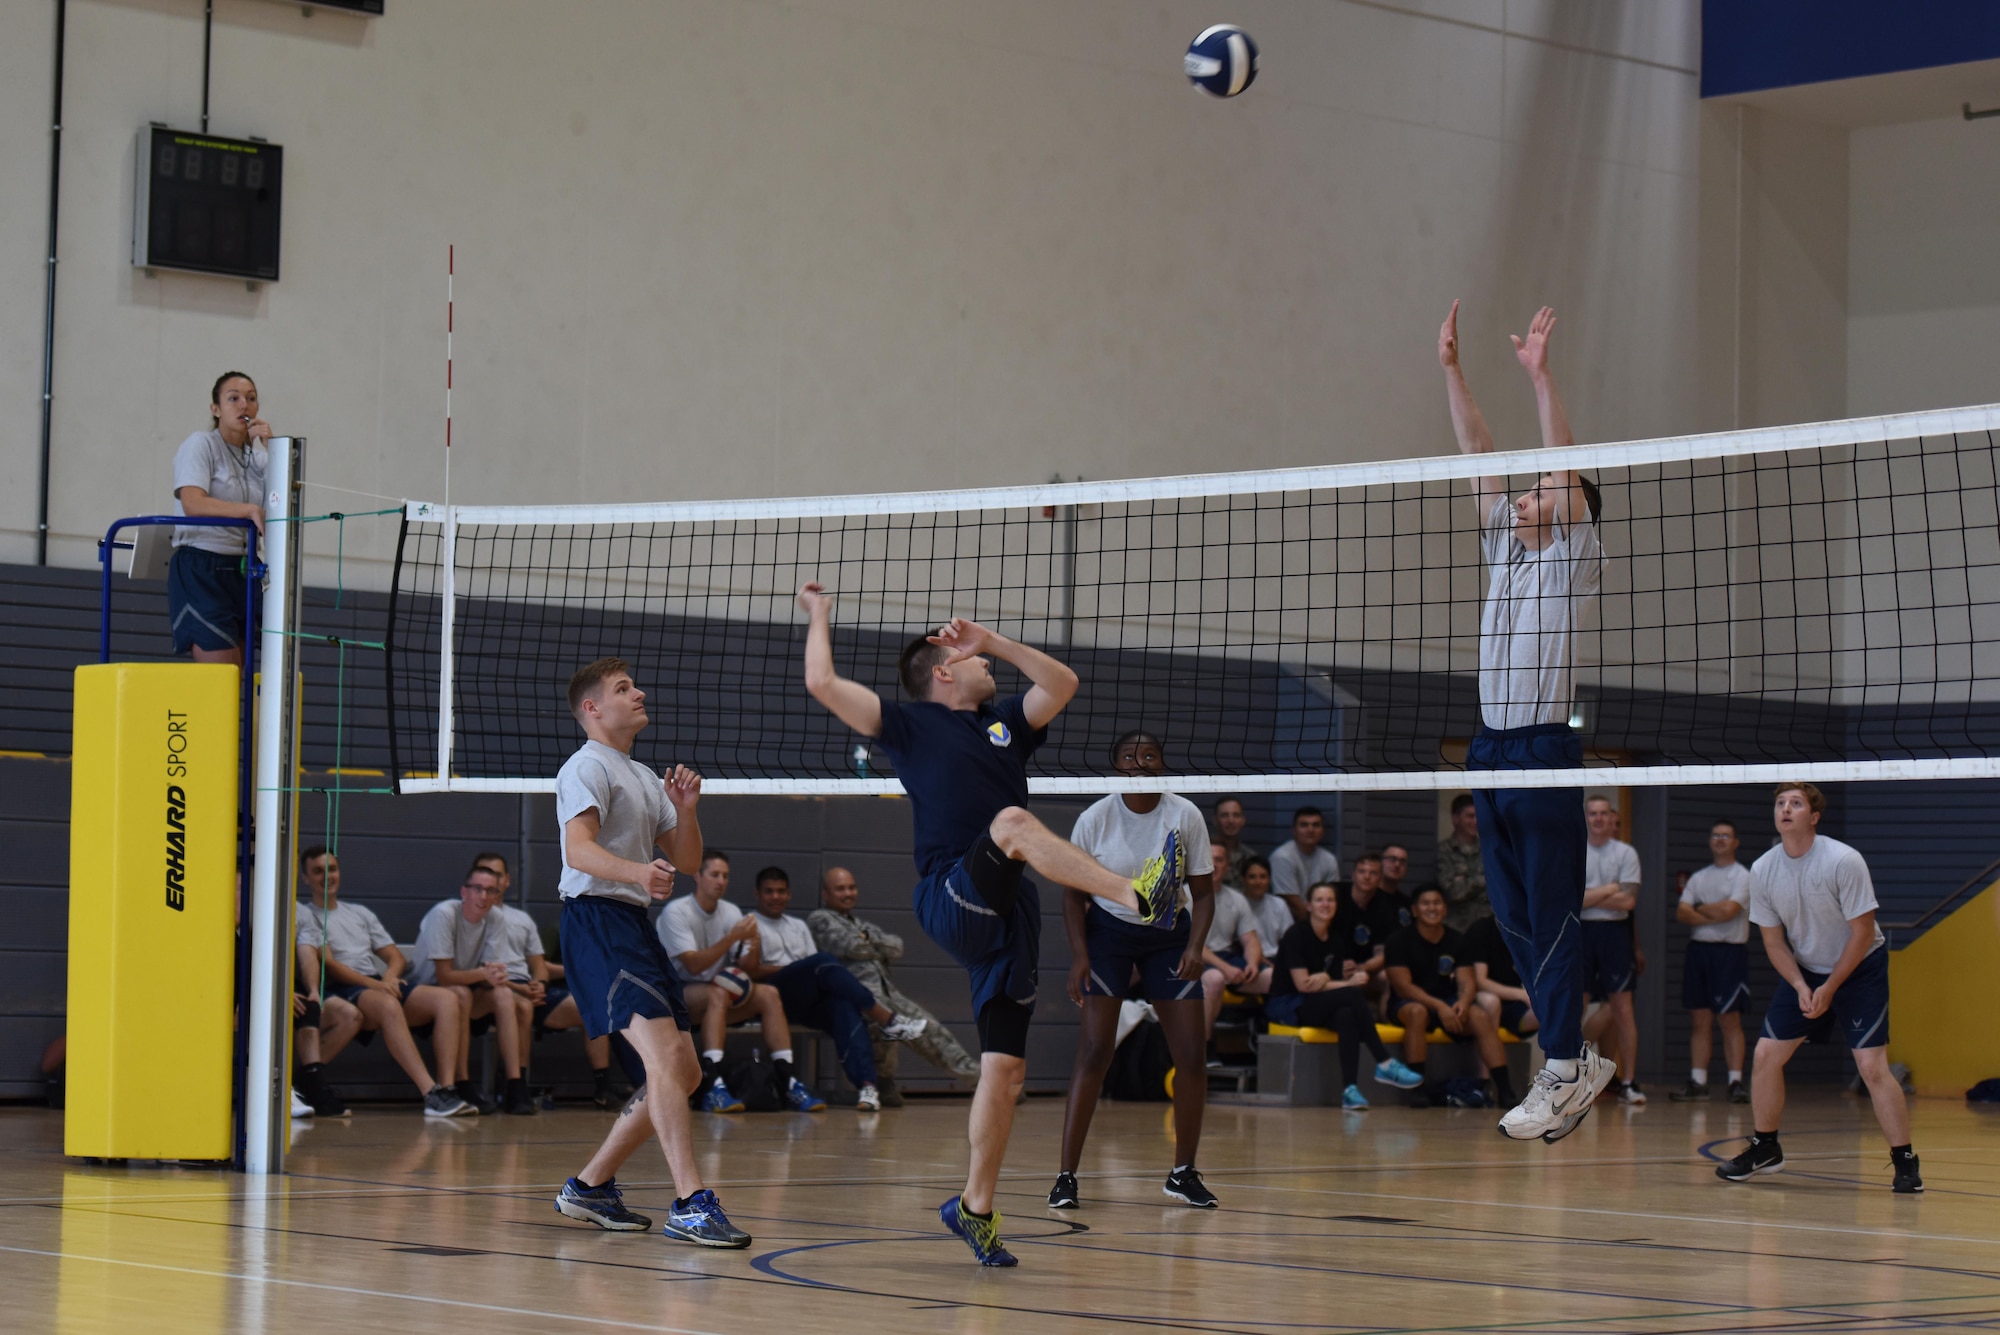 U.S. Airmen assigned to the 86th Airlift Wing compete in a volleyball game during the Commander’s Cup on Ramstein Air Base, Germany, Sept. 6, 2017, The Commanders Cup Challenge is a wing sponsored resiliency event to get airman to get out of the office and be active. (U.S. Air Force photo by Airman 1st Class Milton Hamilton)